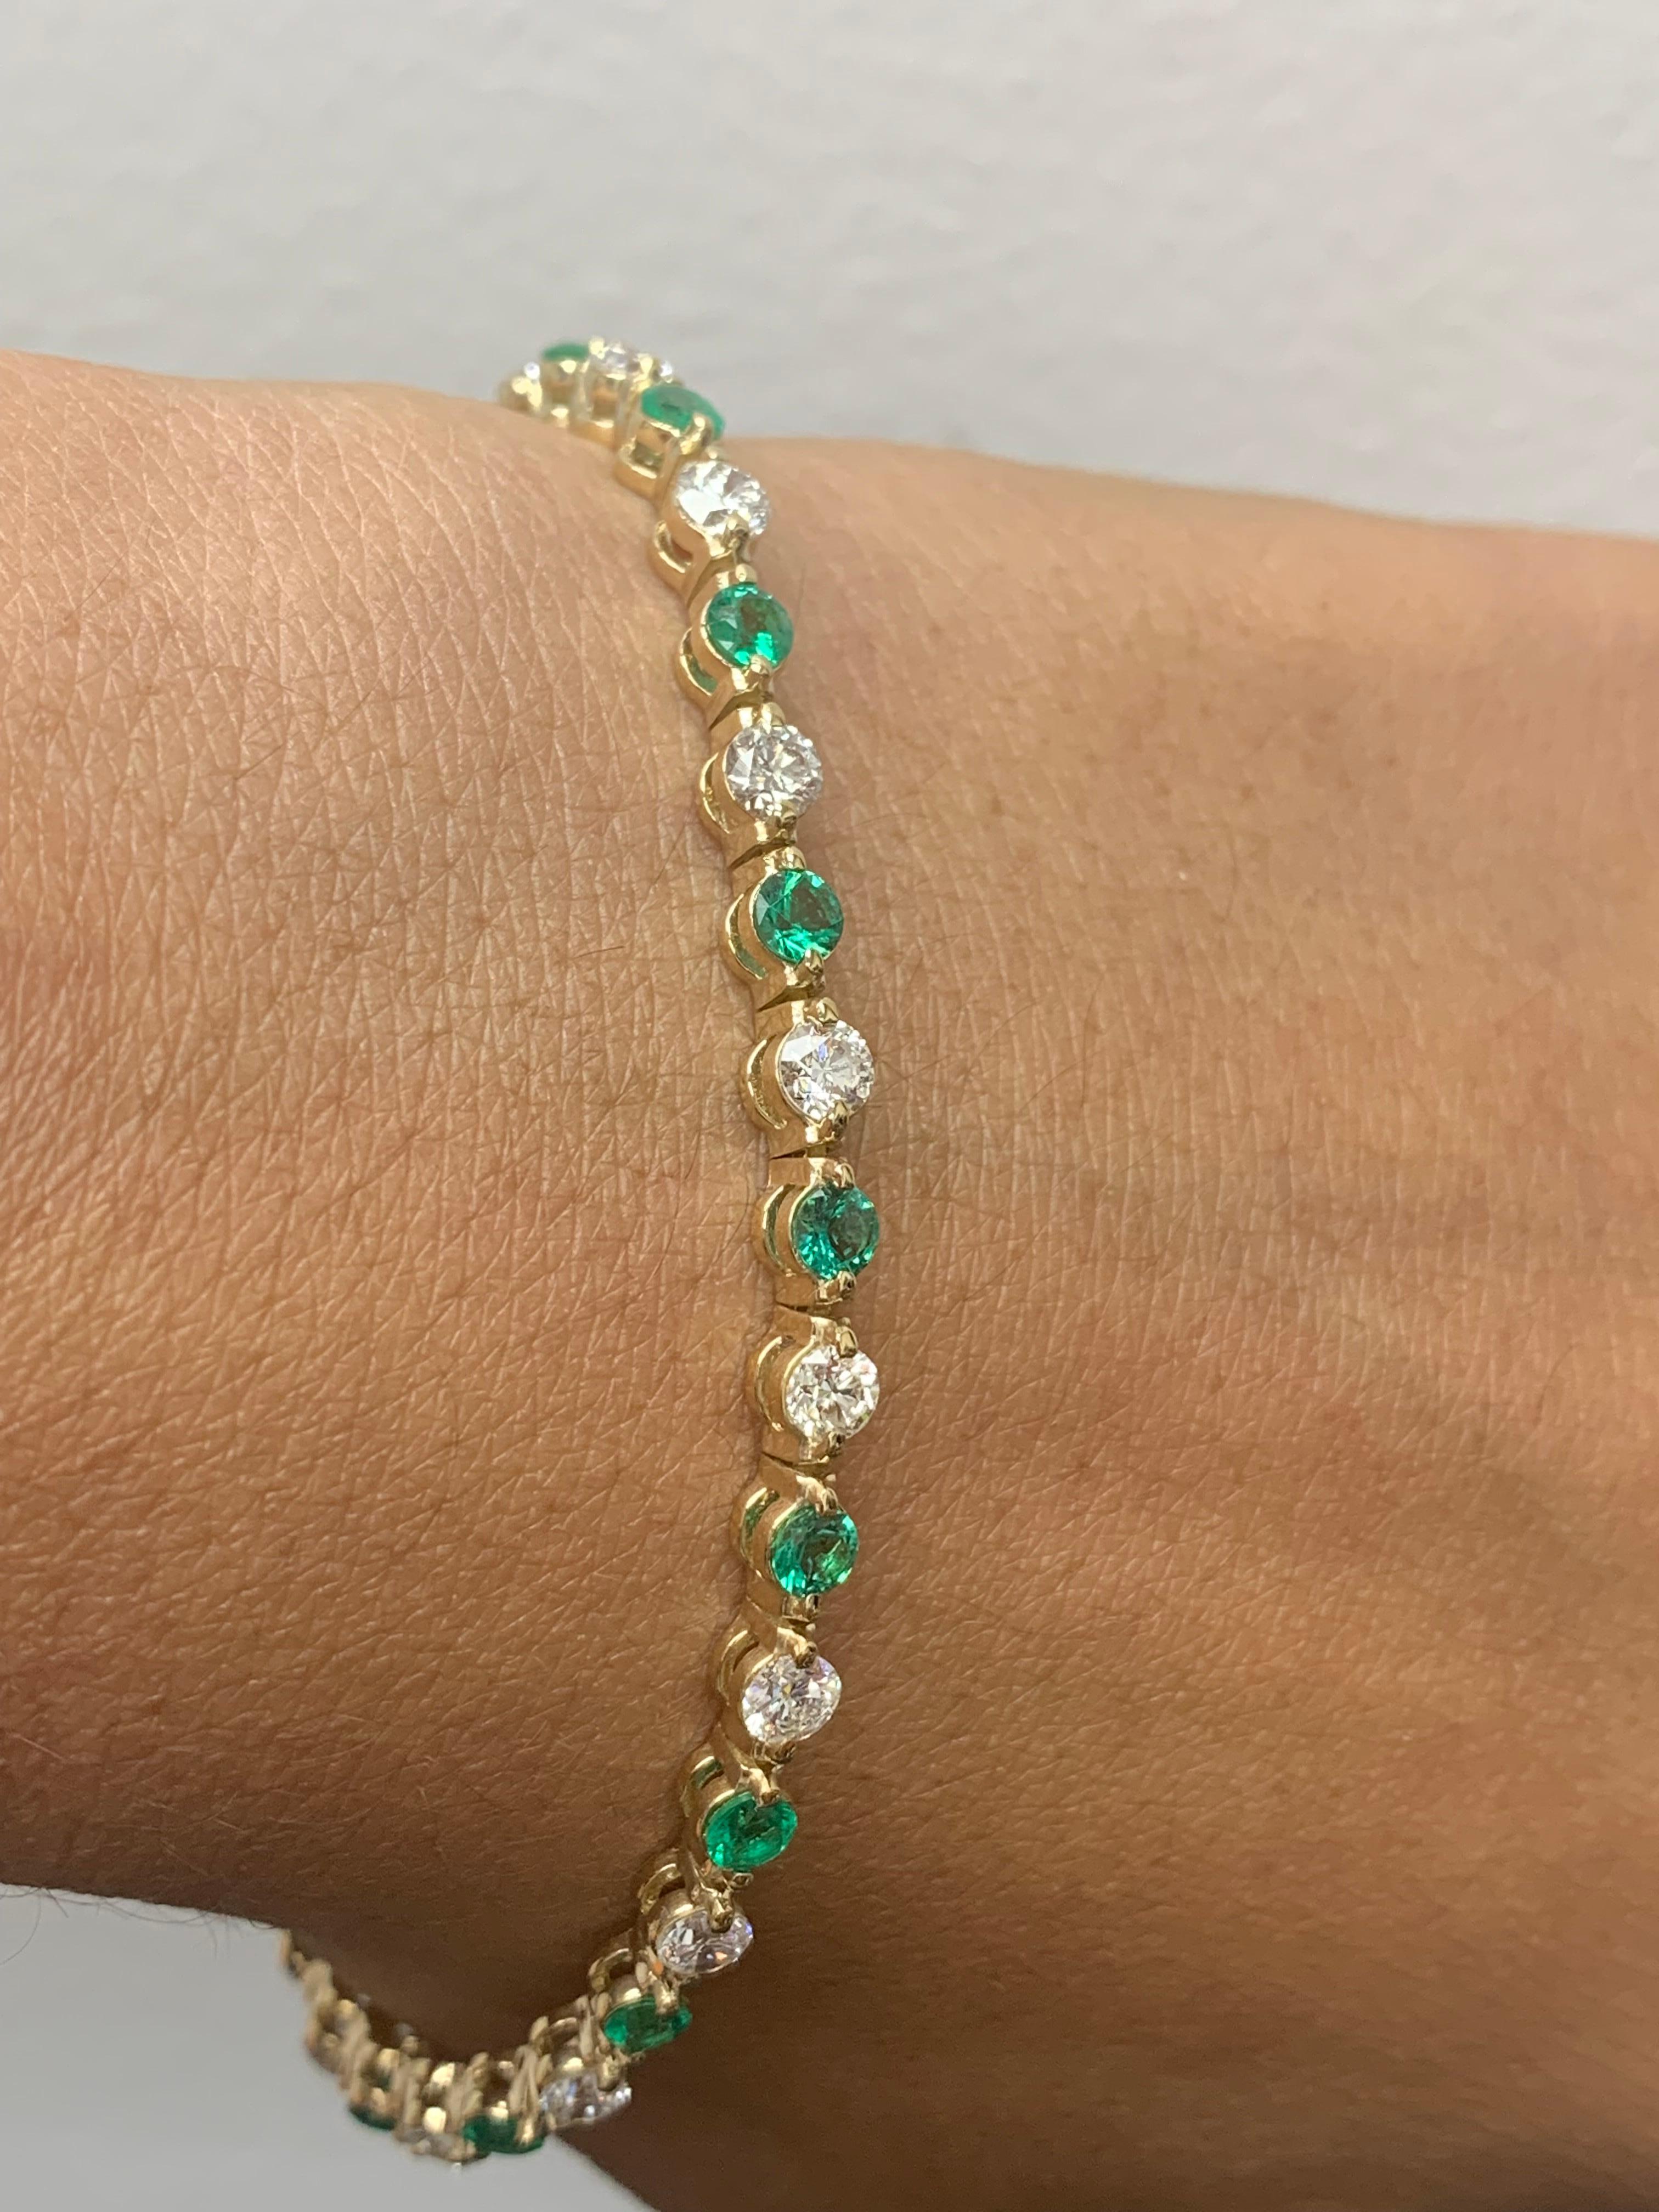 Modern 2.05 Carat Round Emerald and Diamond Bracelet in 14K Yellow Gold For Sale